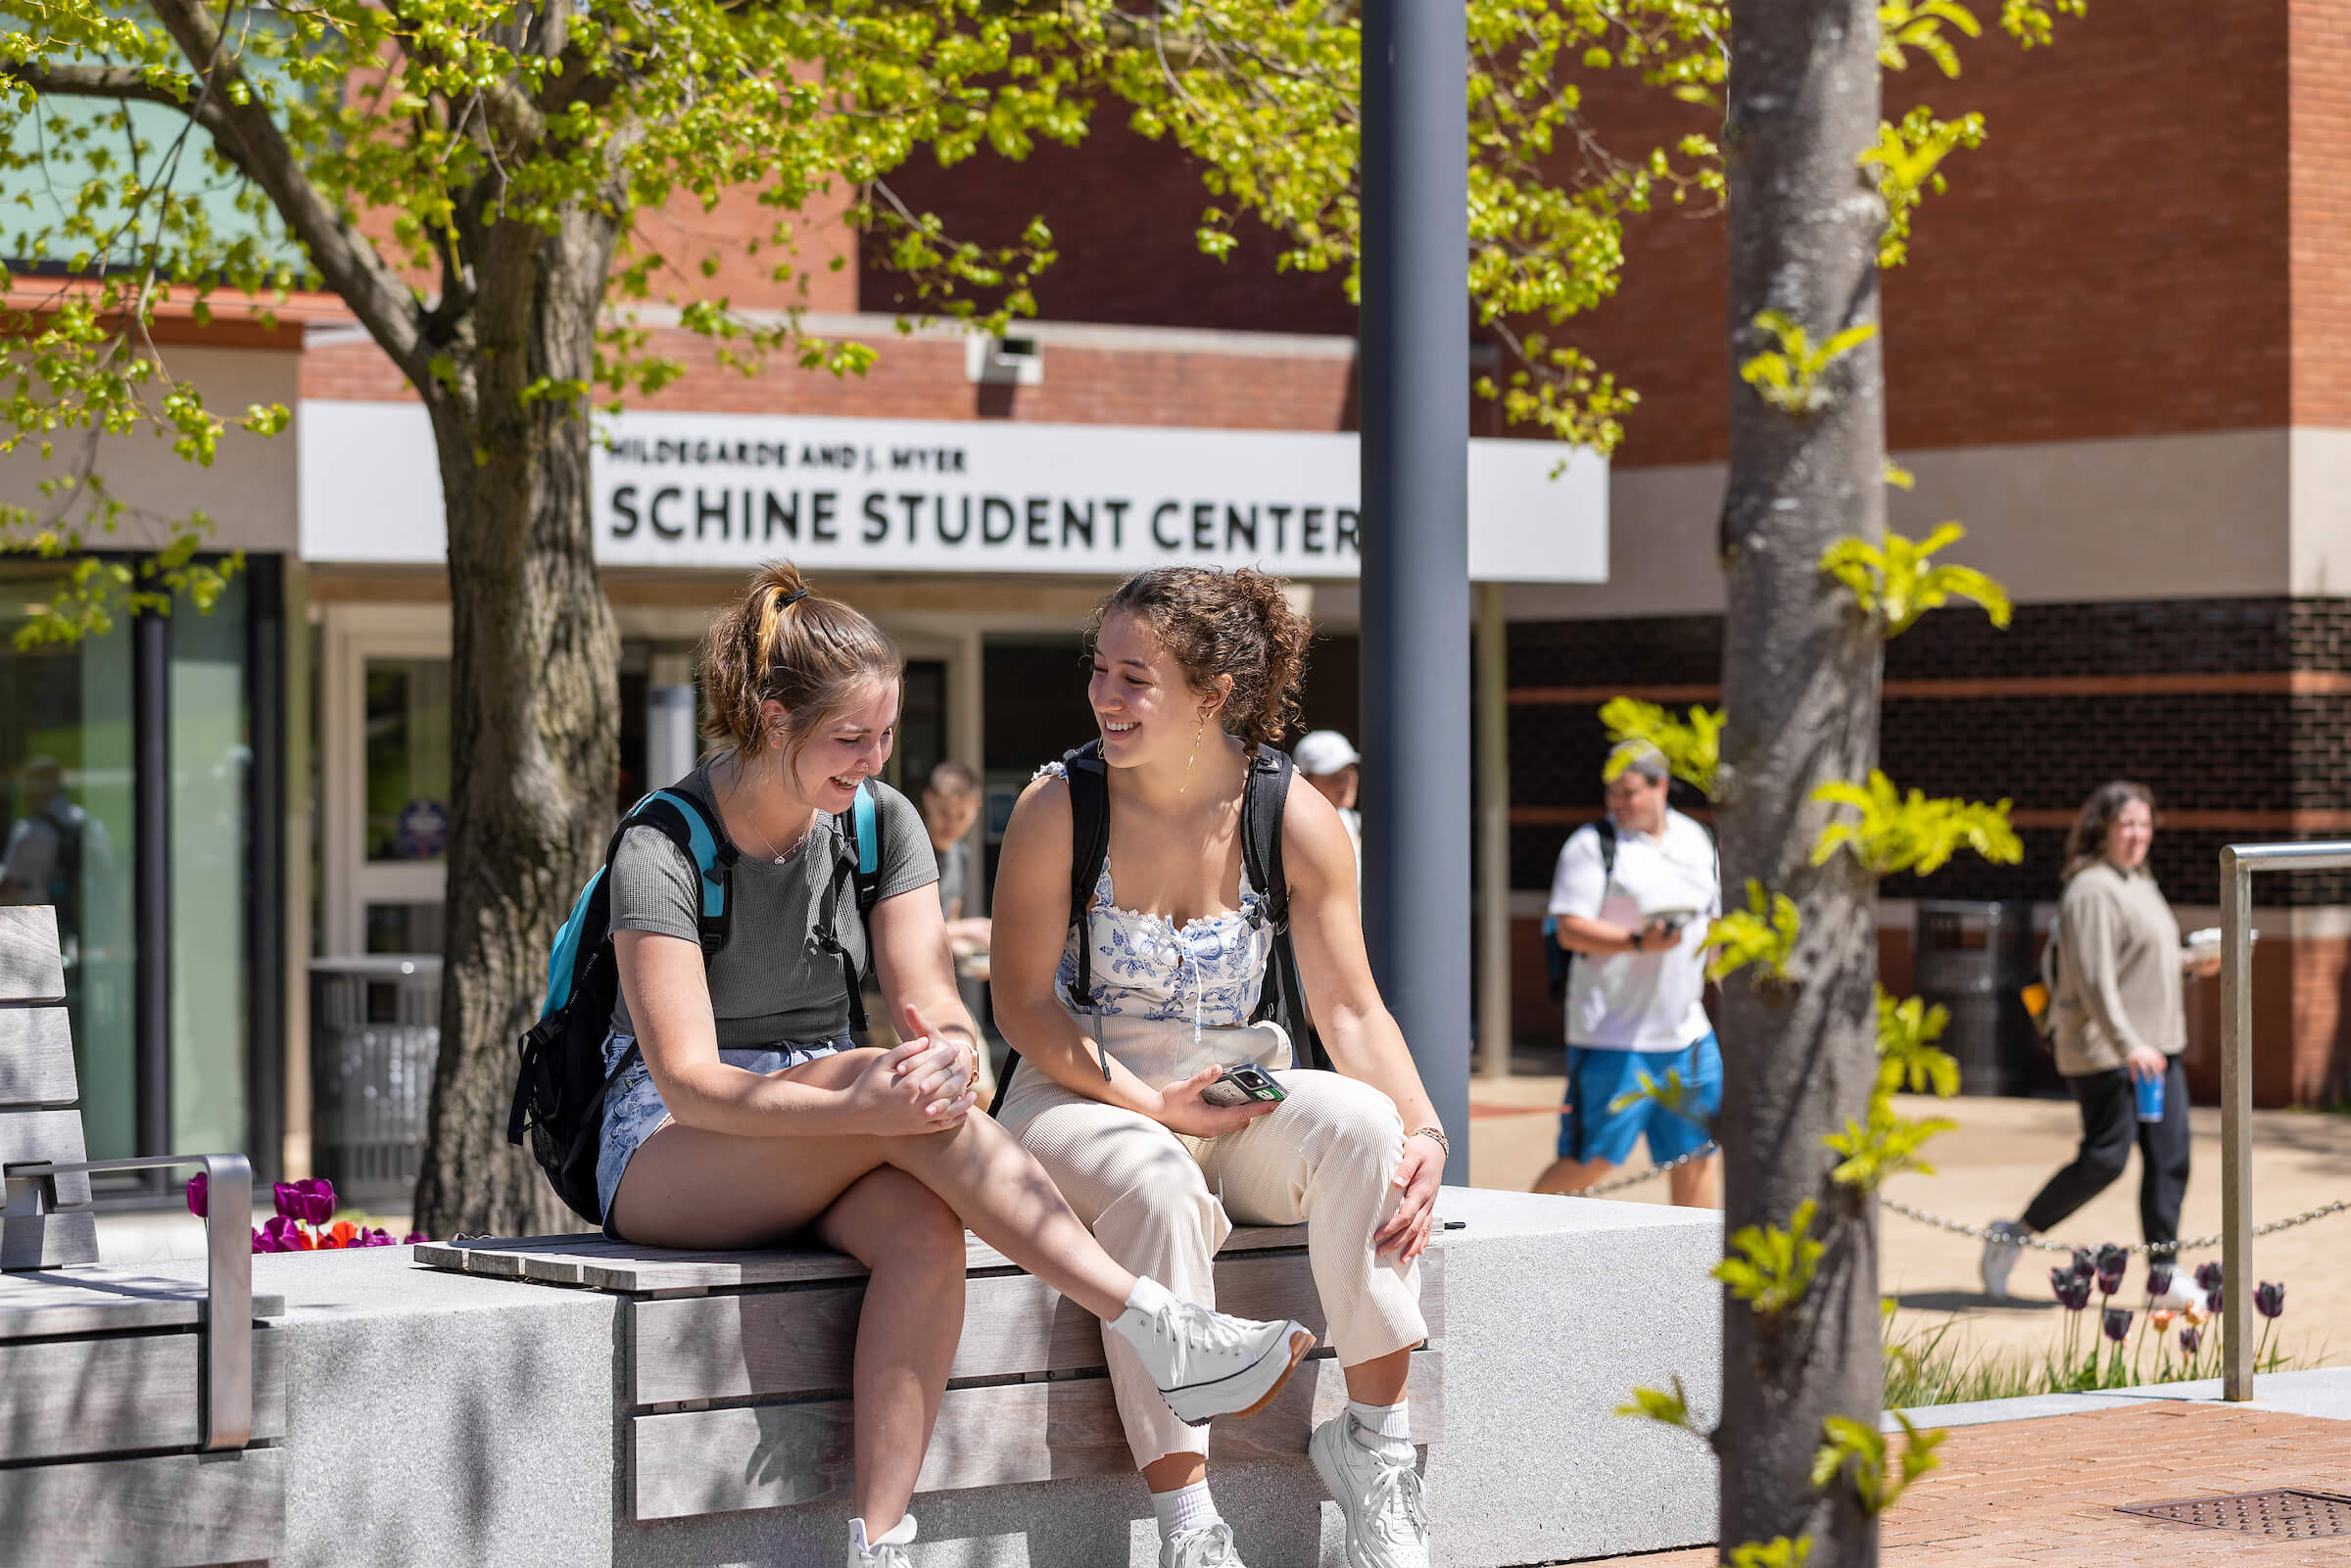 Two students talk and laugh outside Schine Student Center.